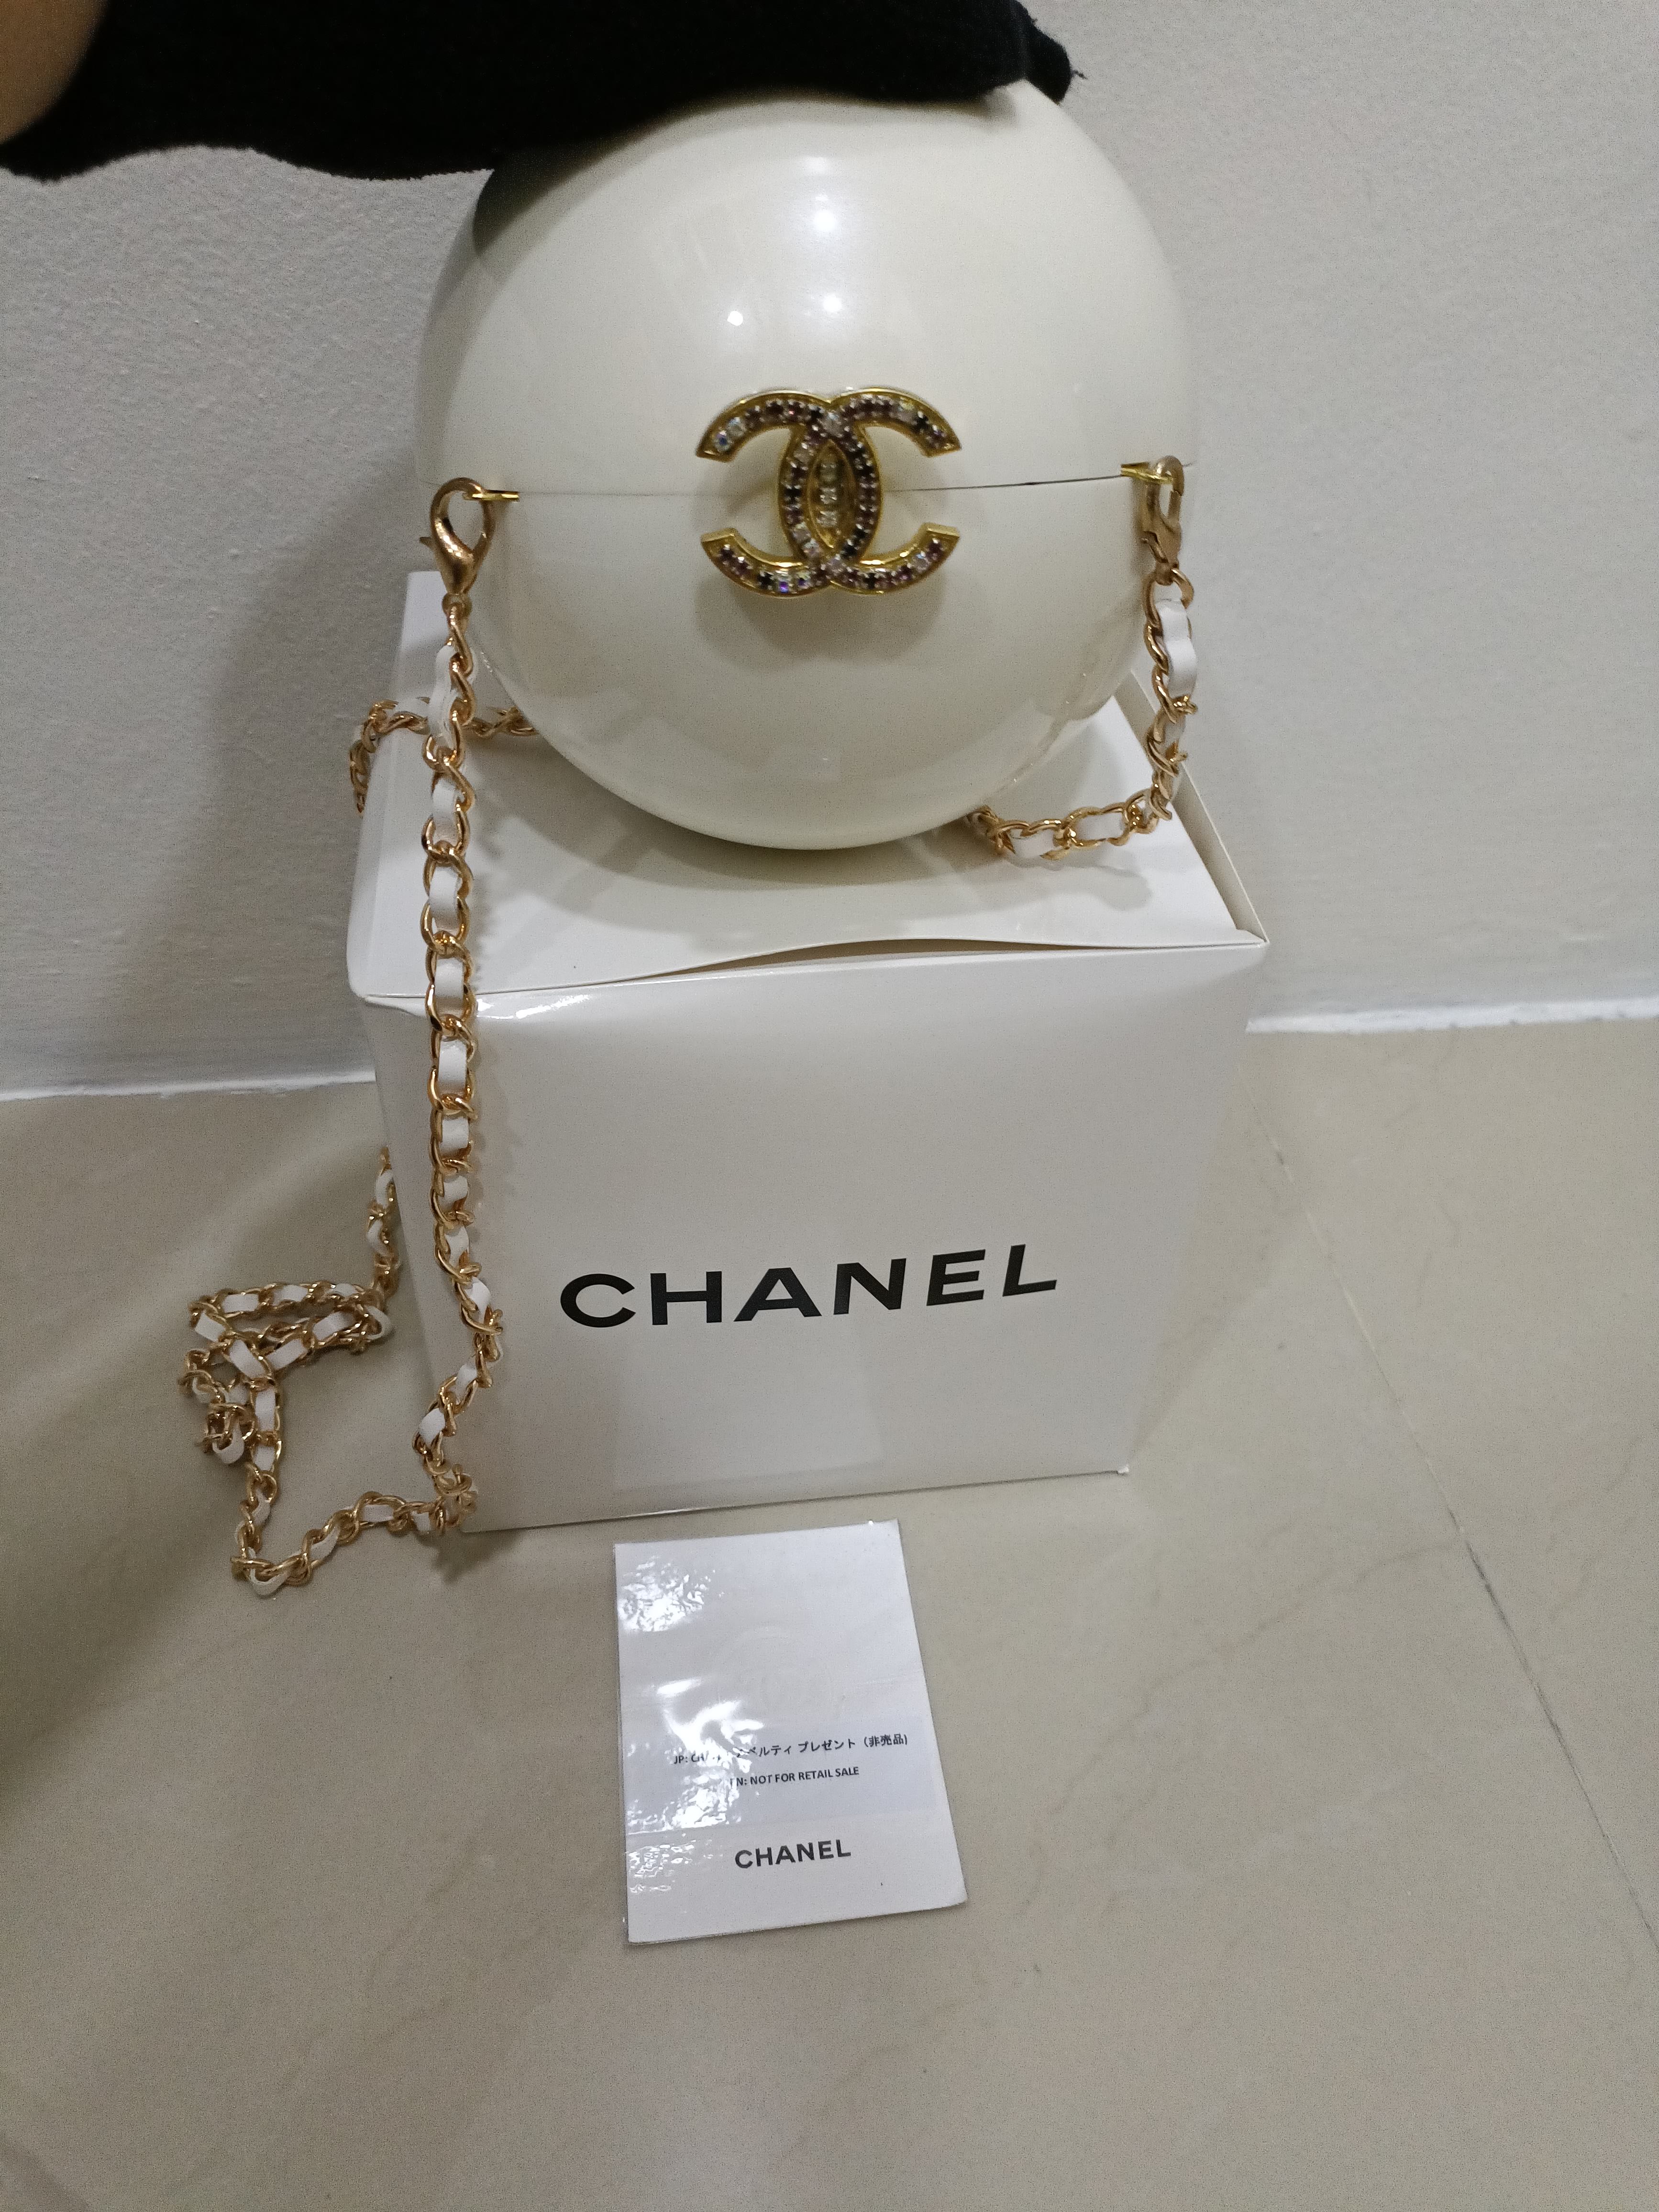 Chanel Vip Gift  Chanel pearls, Pearl bag, Fancy bags